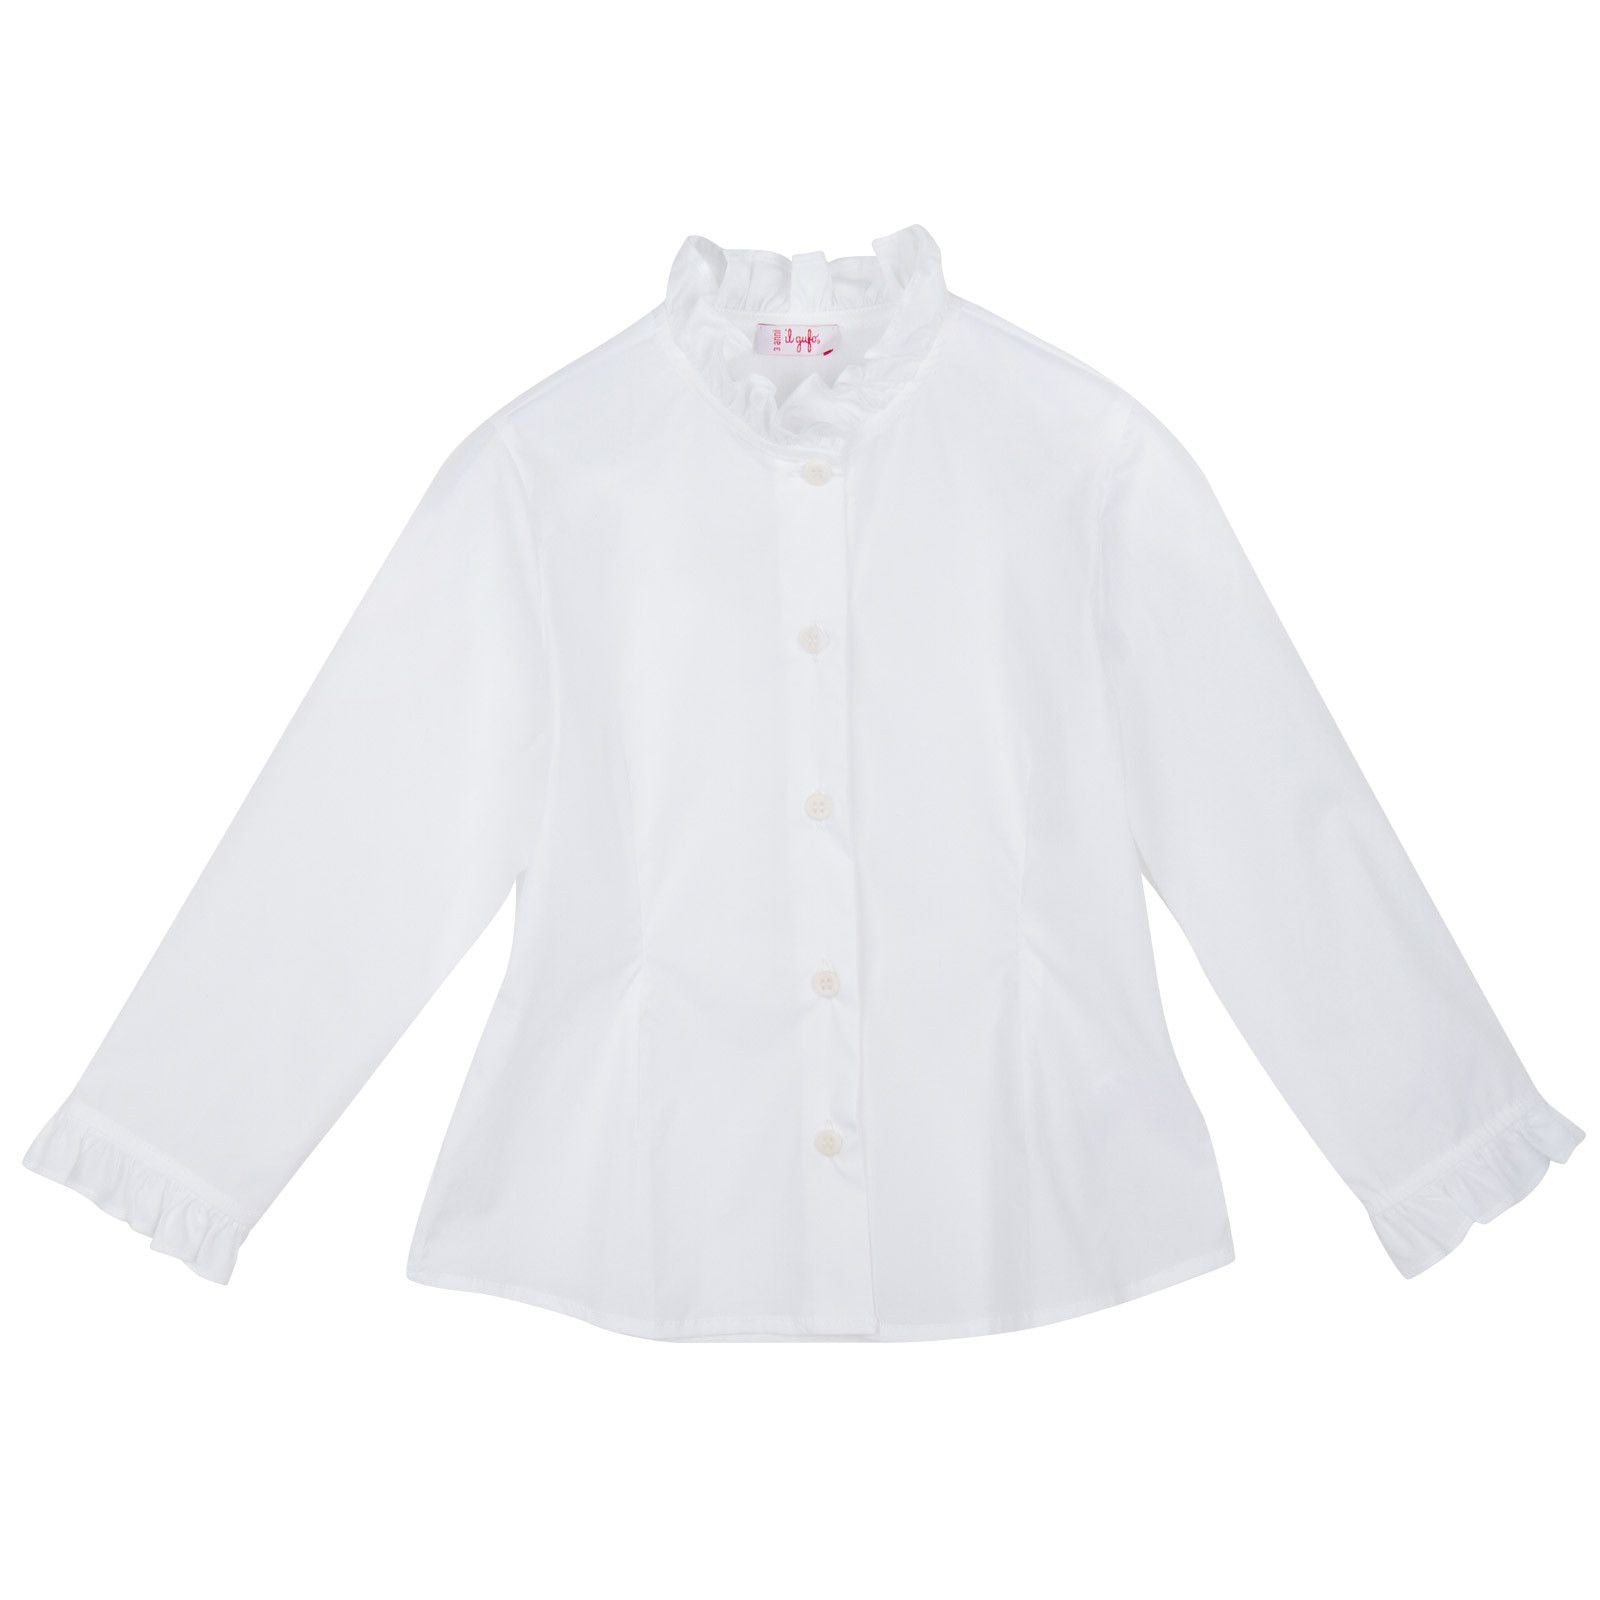 Girls White Jersey Blouse With Frilly Collar and Cuffs - CÉMAROSE | Children's Fashion Store - 1